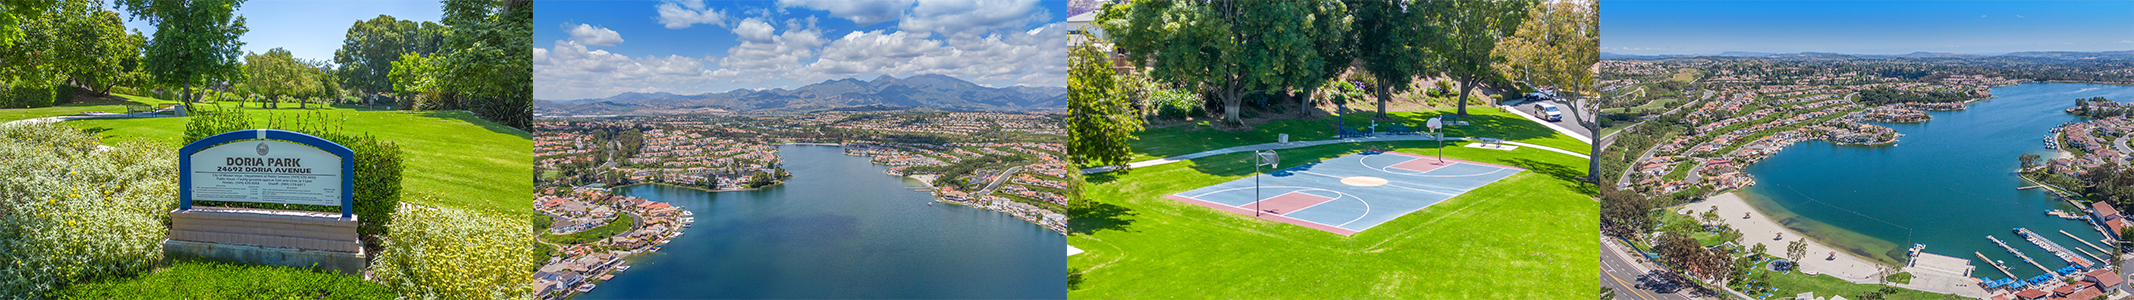 Aegean Hills Mission Viejo Homes For Sale Mike Boucher